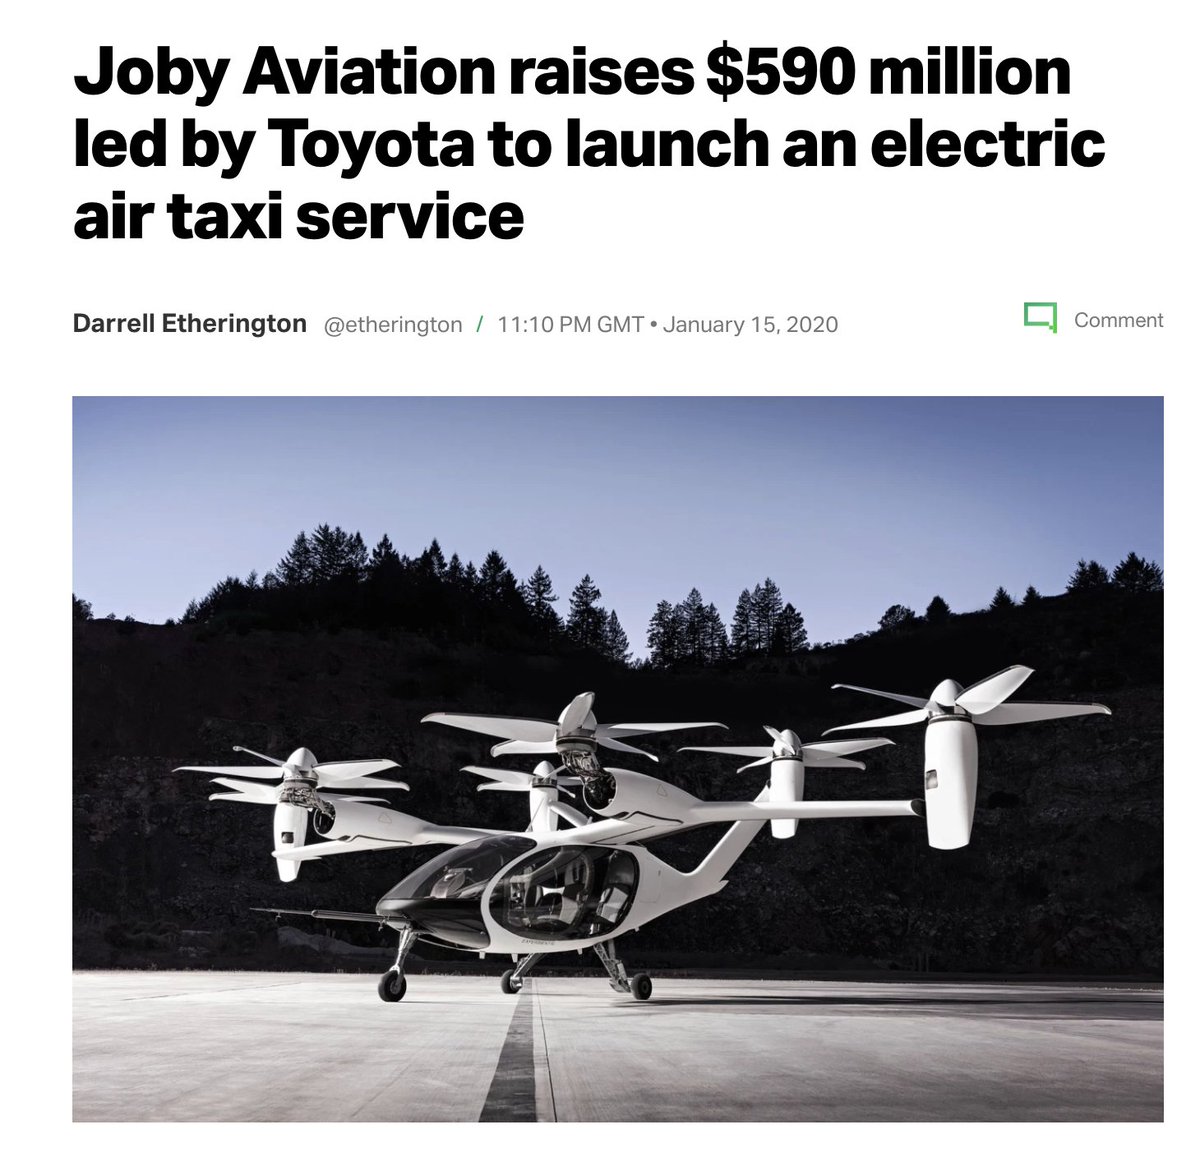 There's serious money on the line here too. Joby Aviation recently raised over *half a billion dollars* for their electric eVTOL, in a funding round led by Toyota: https://techcrunch.com/2020/01/15/joby-aviation-raises-590-million-led-by-toyota-to-launch-an-electric-air-taxi-service/